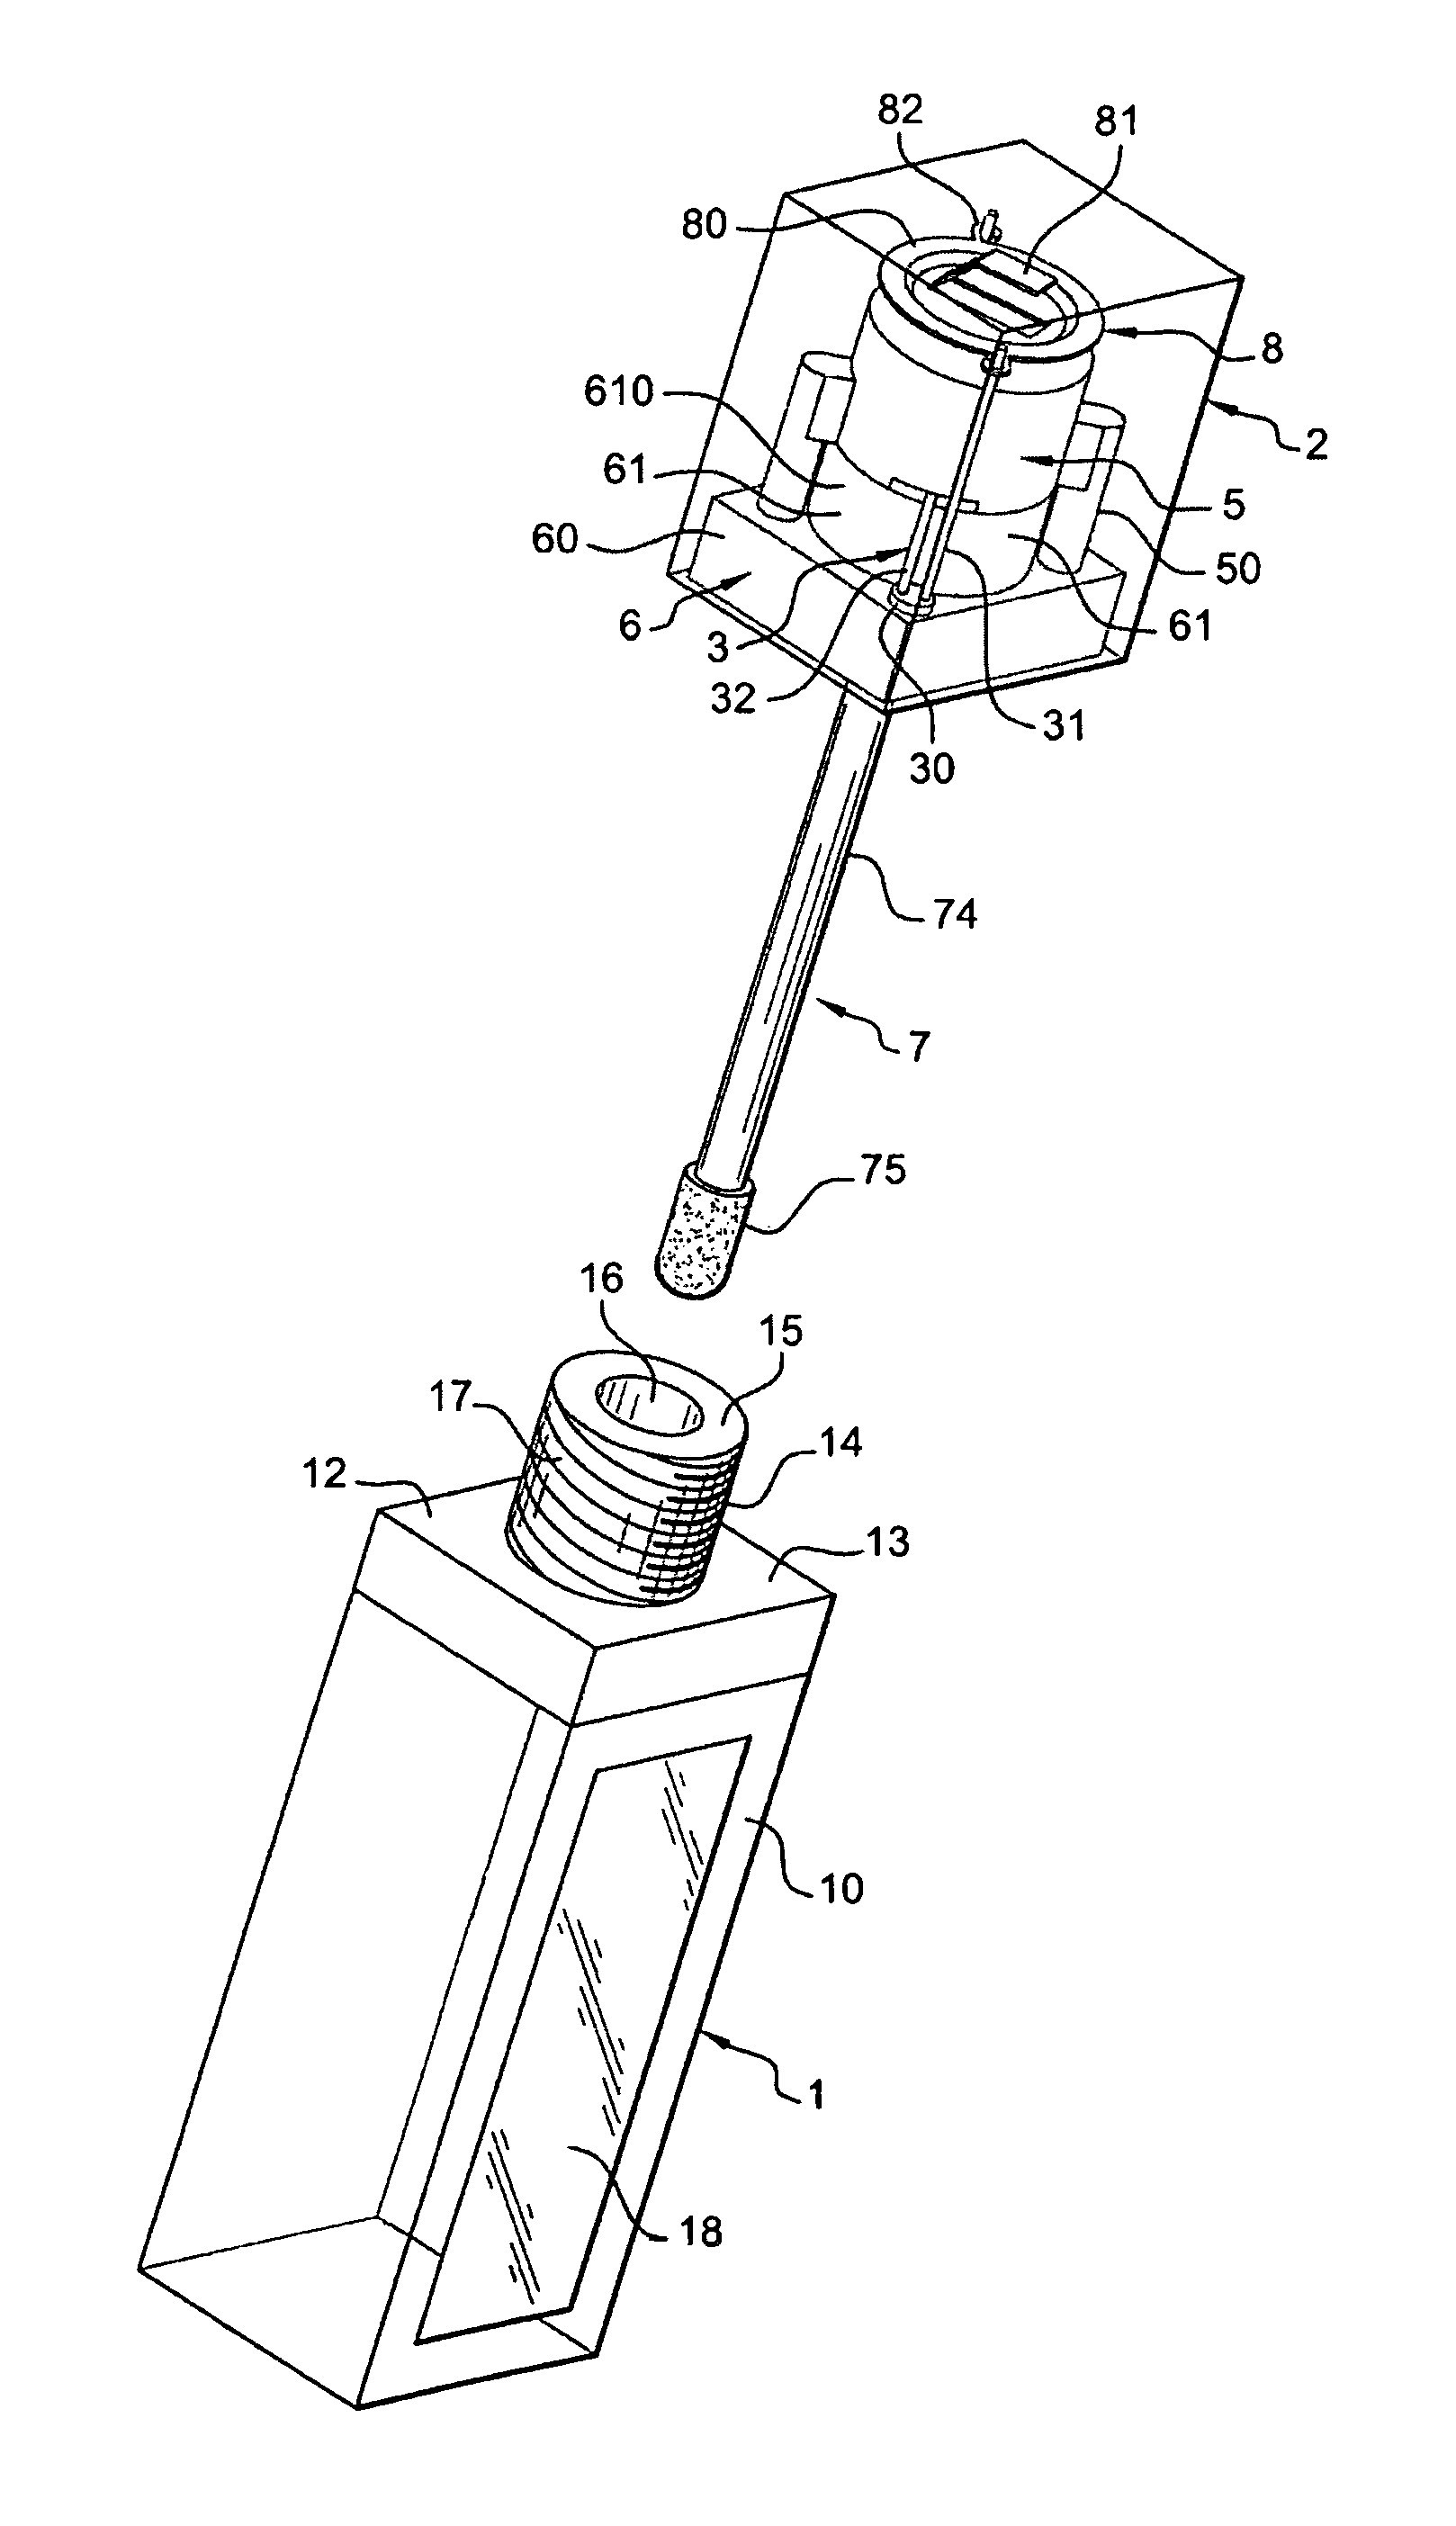 Device for dispensing a cosmetic and/or care product